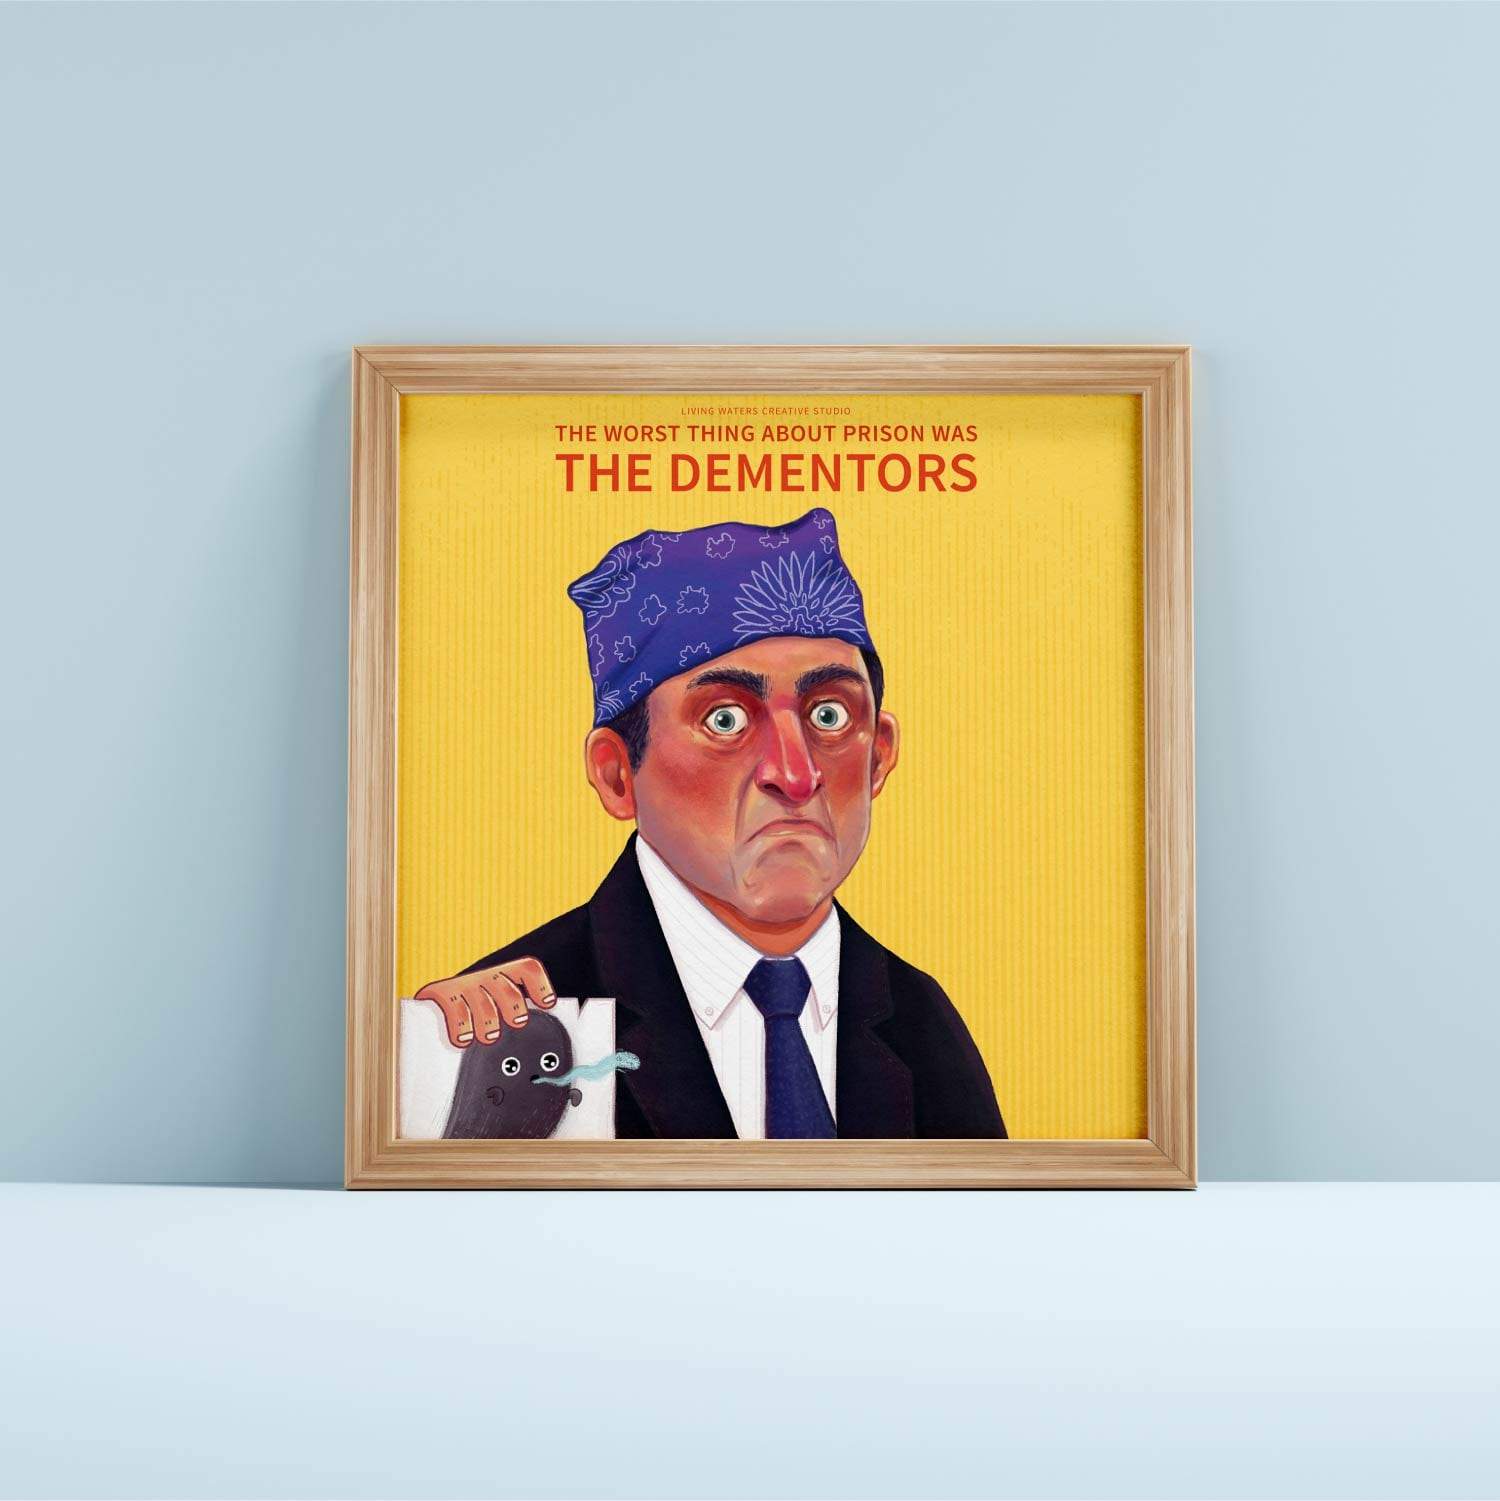 The Prison Mike Canvas Frame